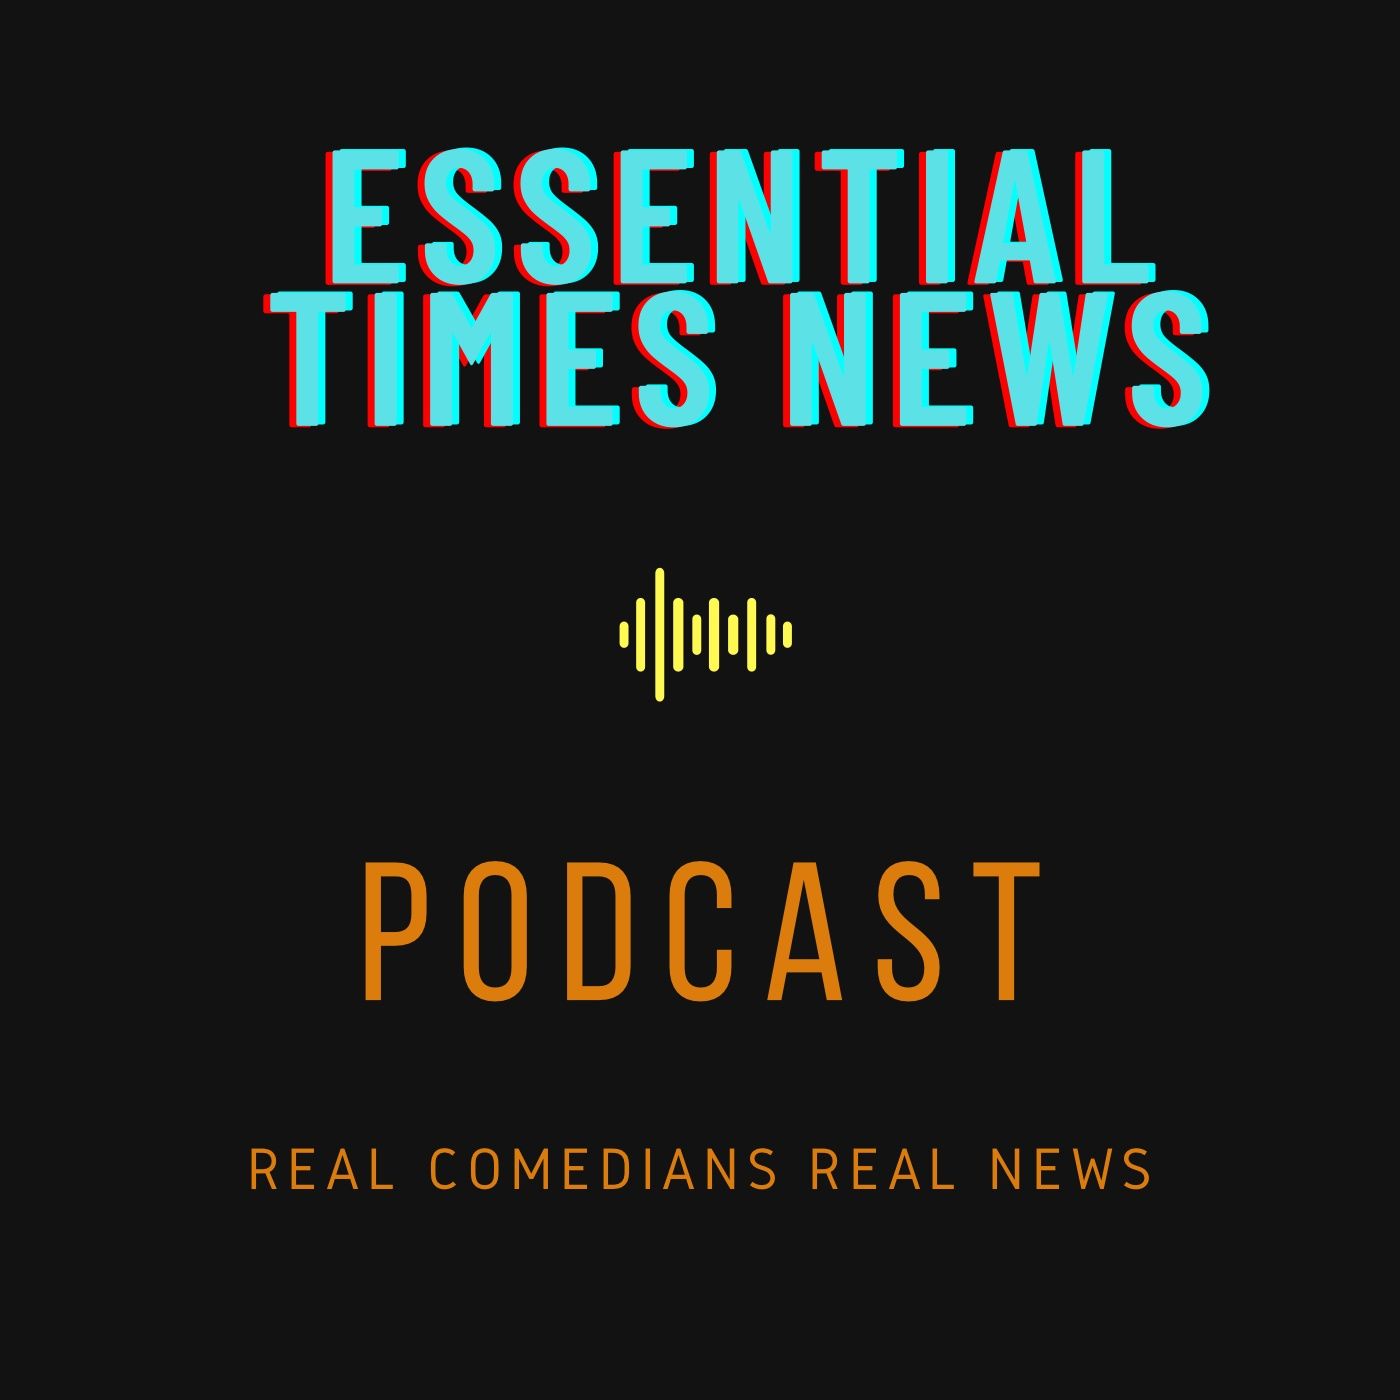 Episode 4: Essential Times News 08/26/2020